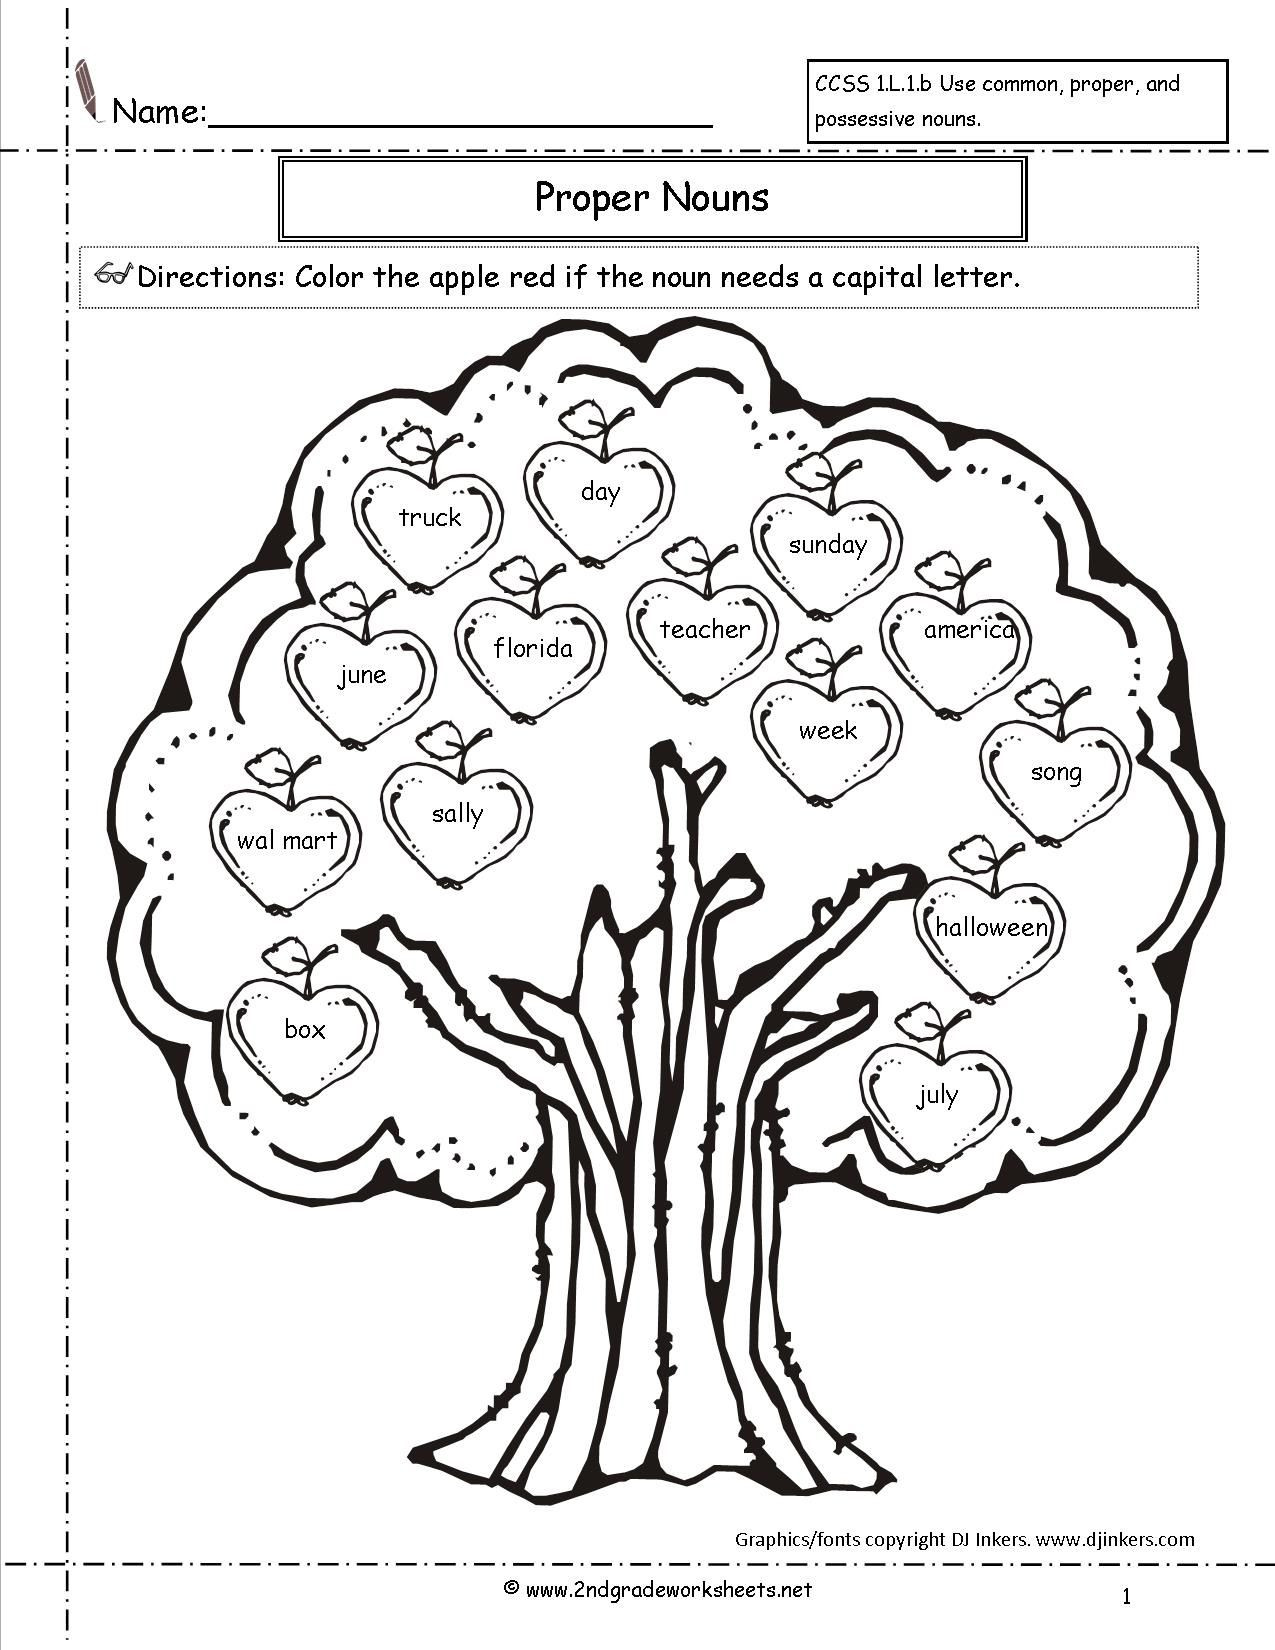 Free Math Worksheets Second Grade 2 Subtraction Subtract 3 Digit Numbers with Regrouping